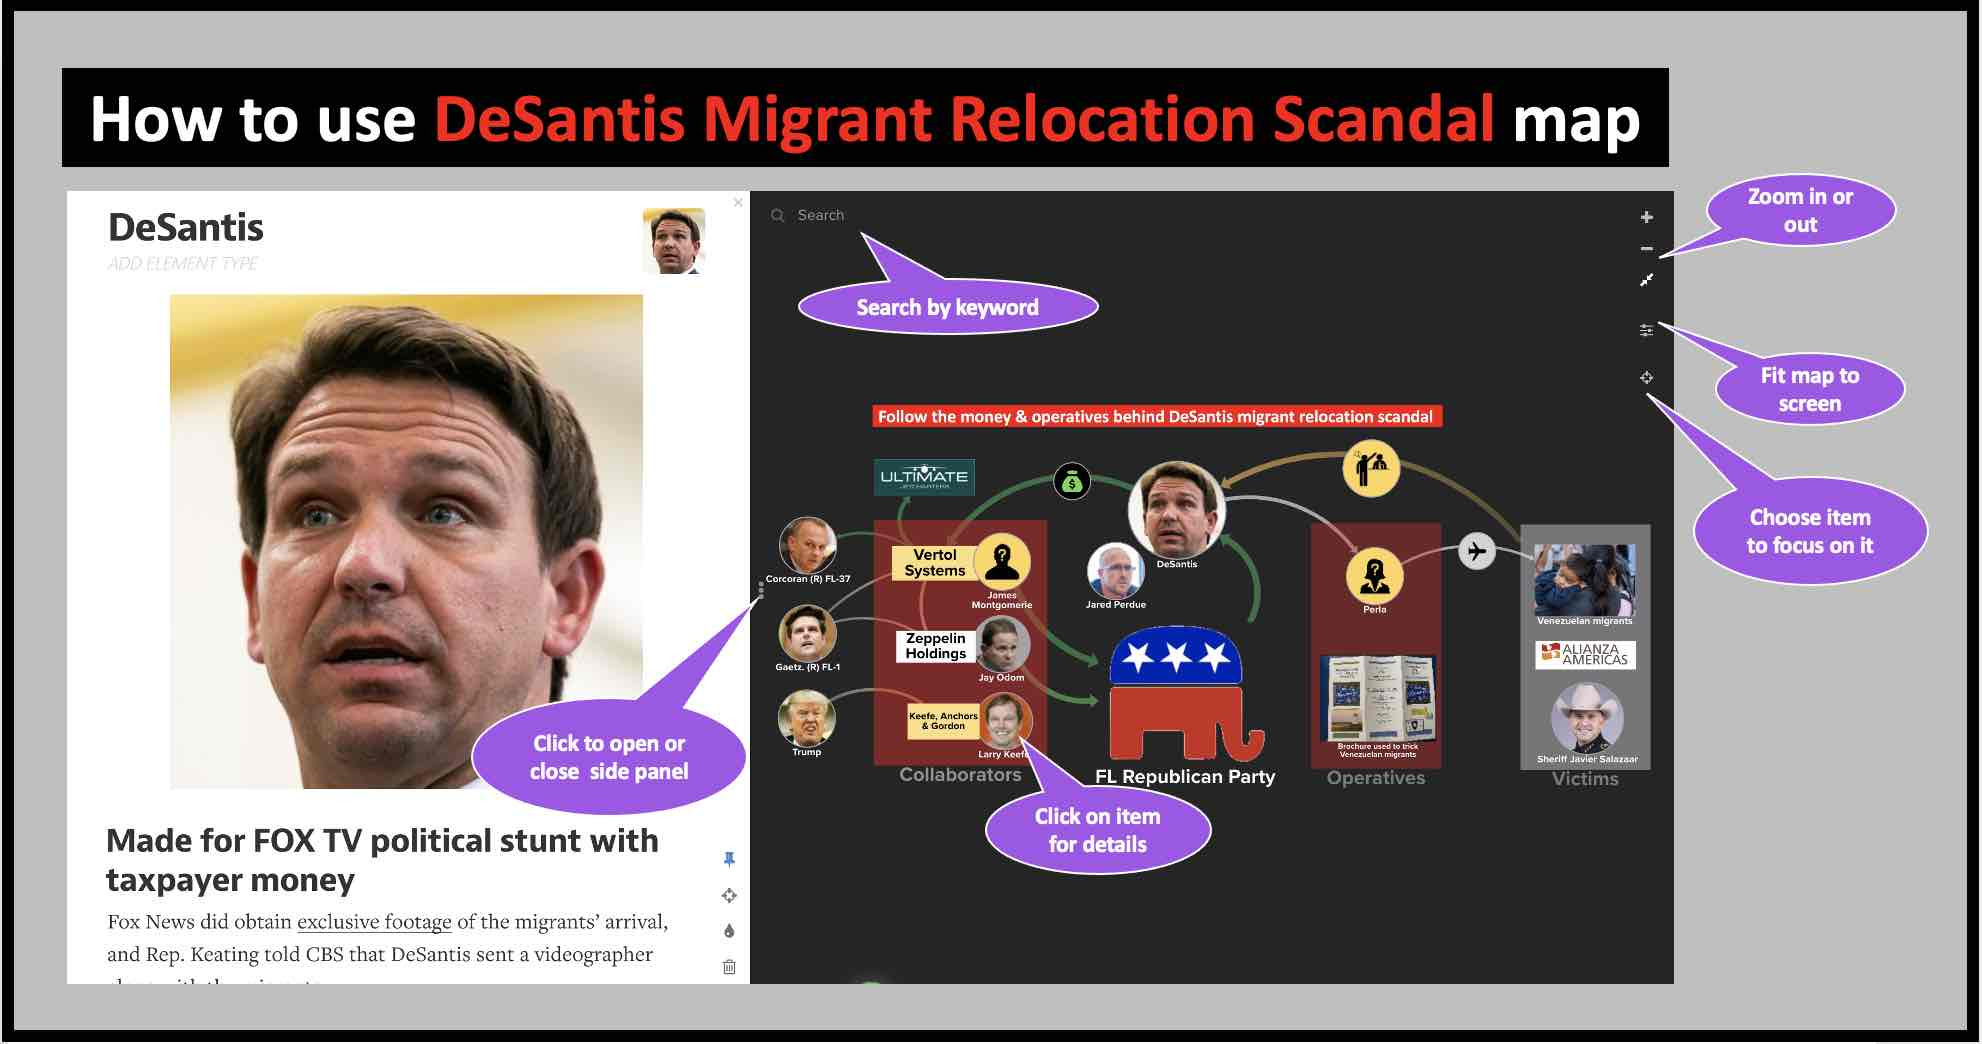 How to use the map to follow the money and operatives behind DeSantis' MIGRANT RELOCATION SCANDAL